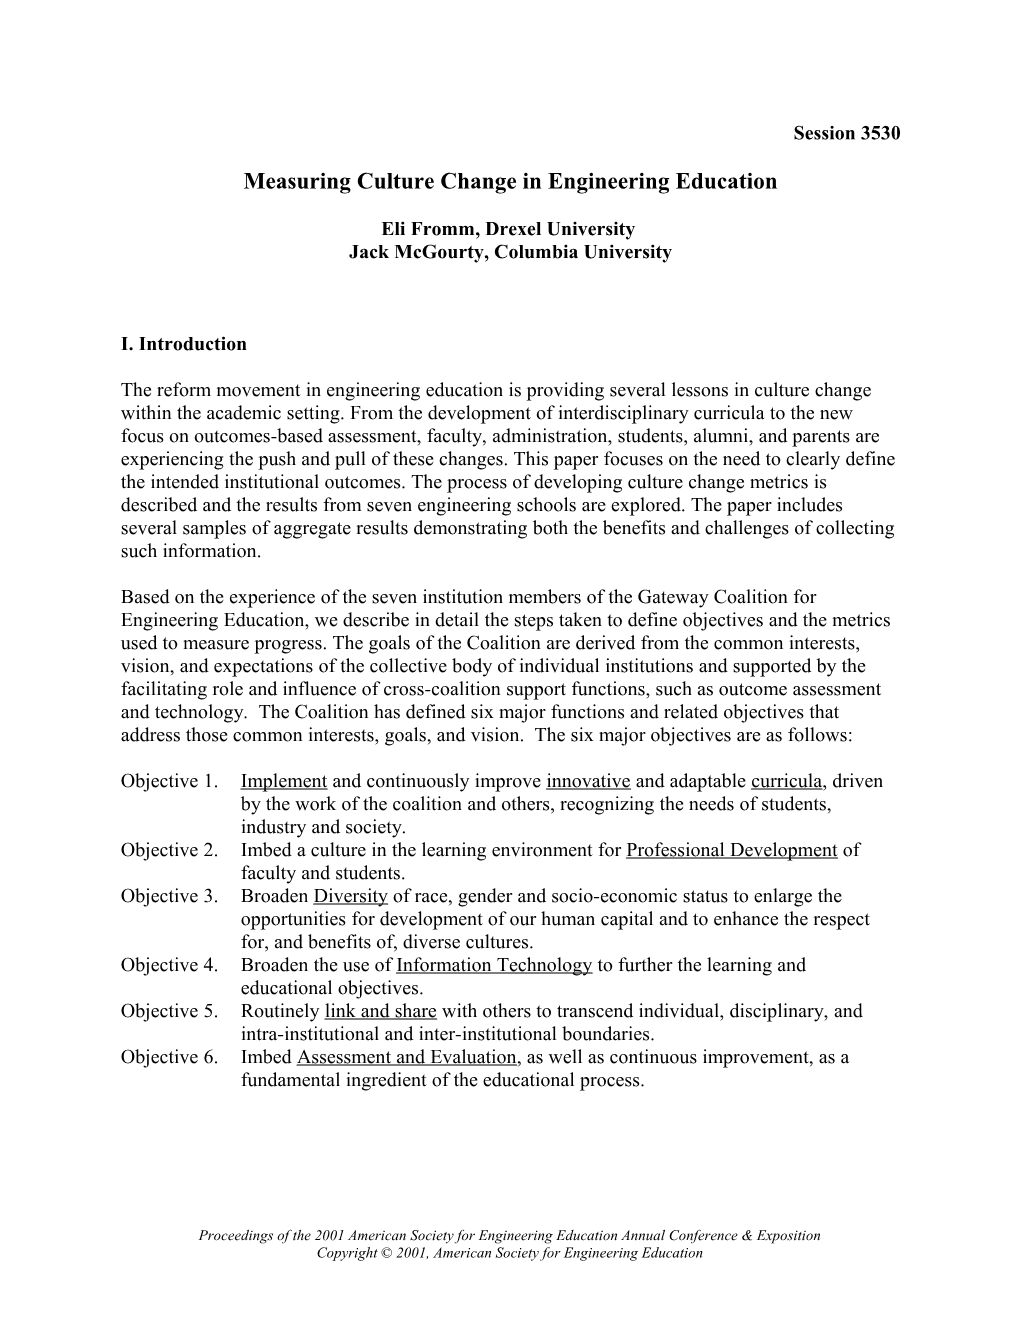 Measuring Culture Change in Engineering Education